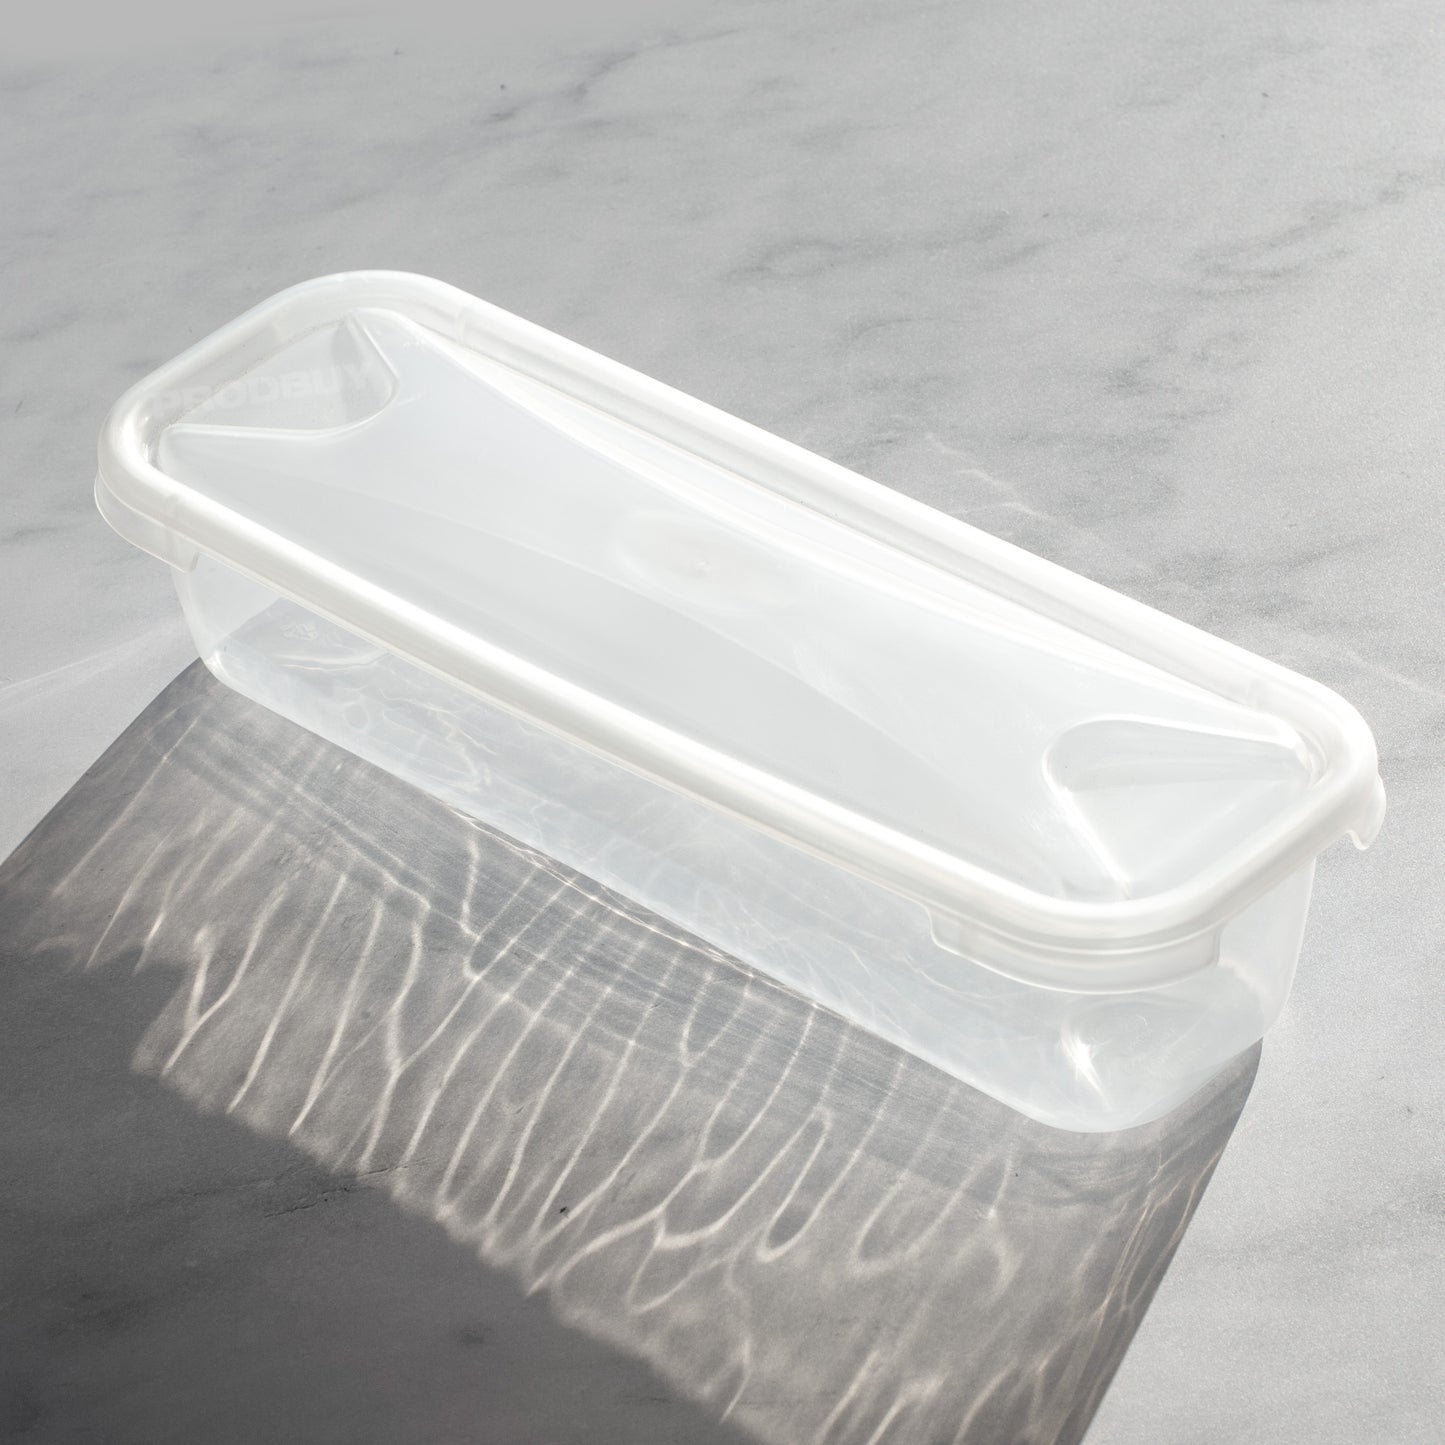 Set of 2 Long 30cm Food Storage Containers with Clear Lids